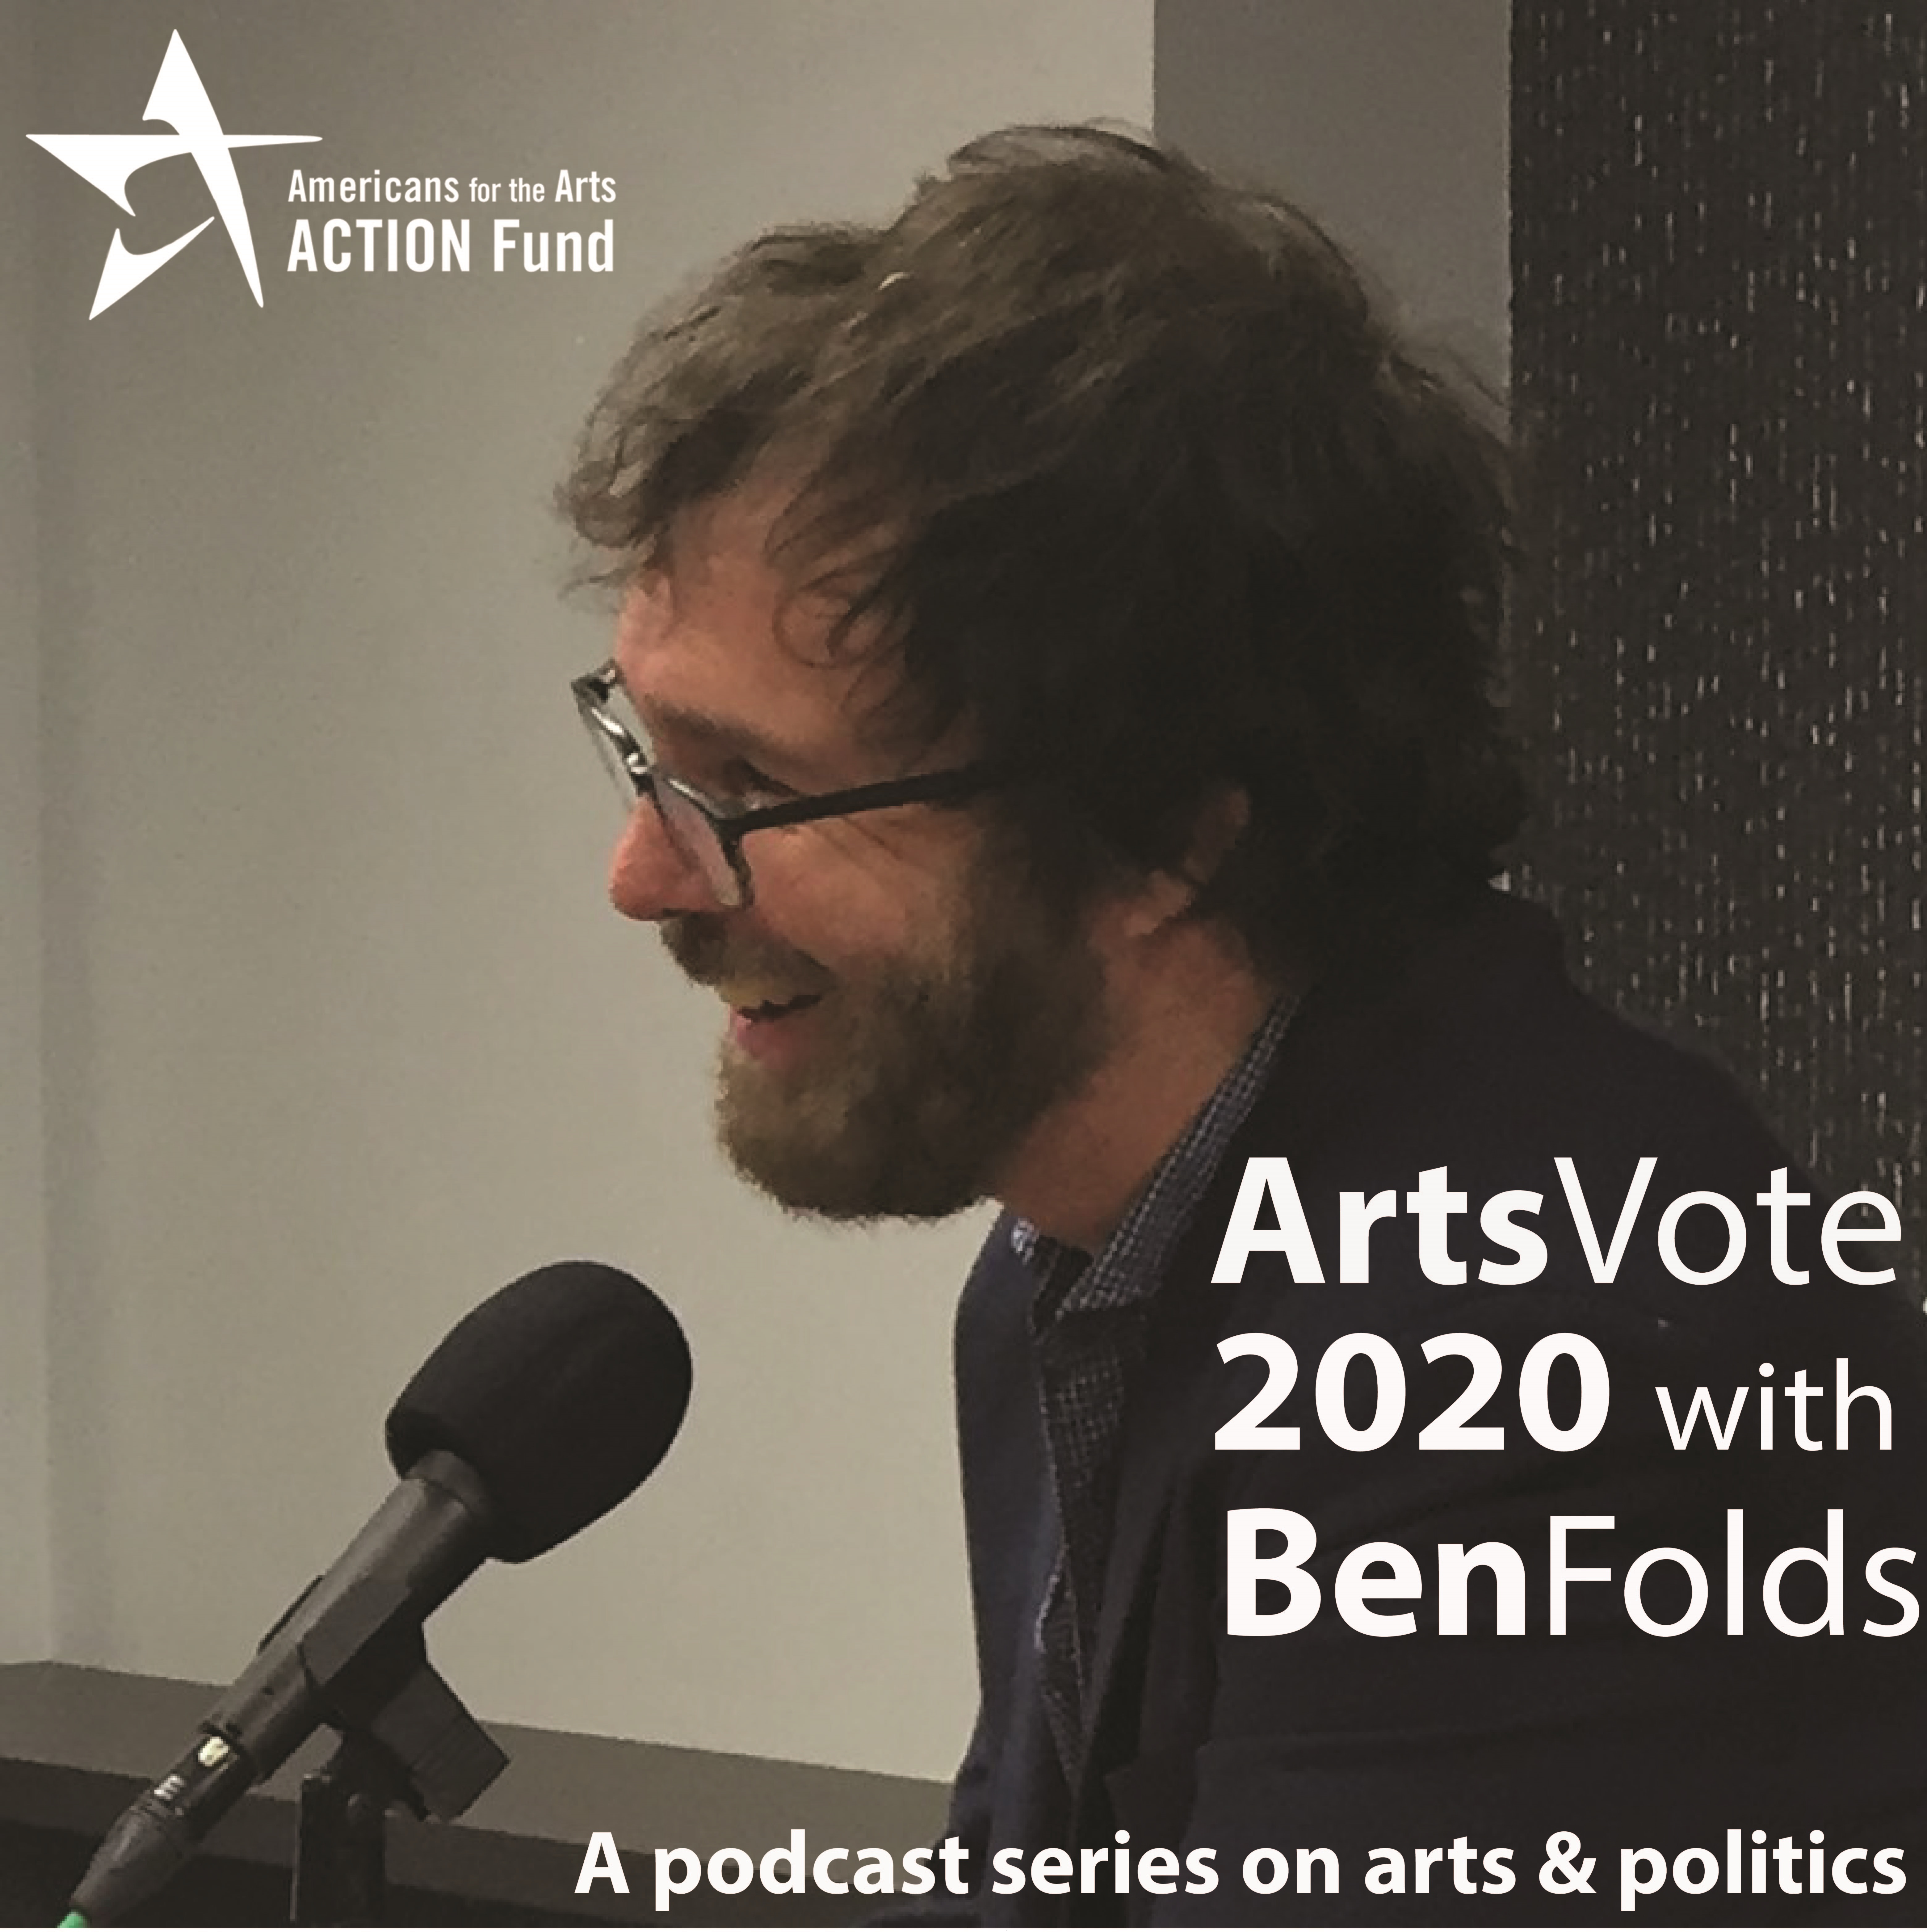 Ben Folds at a podcast microphone speaking.